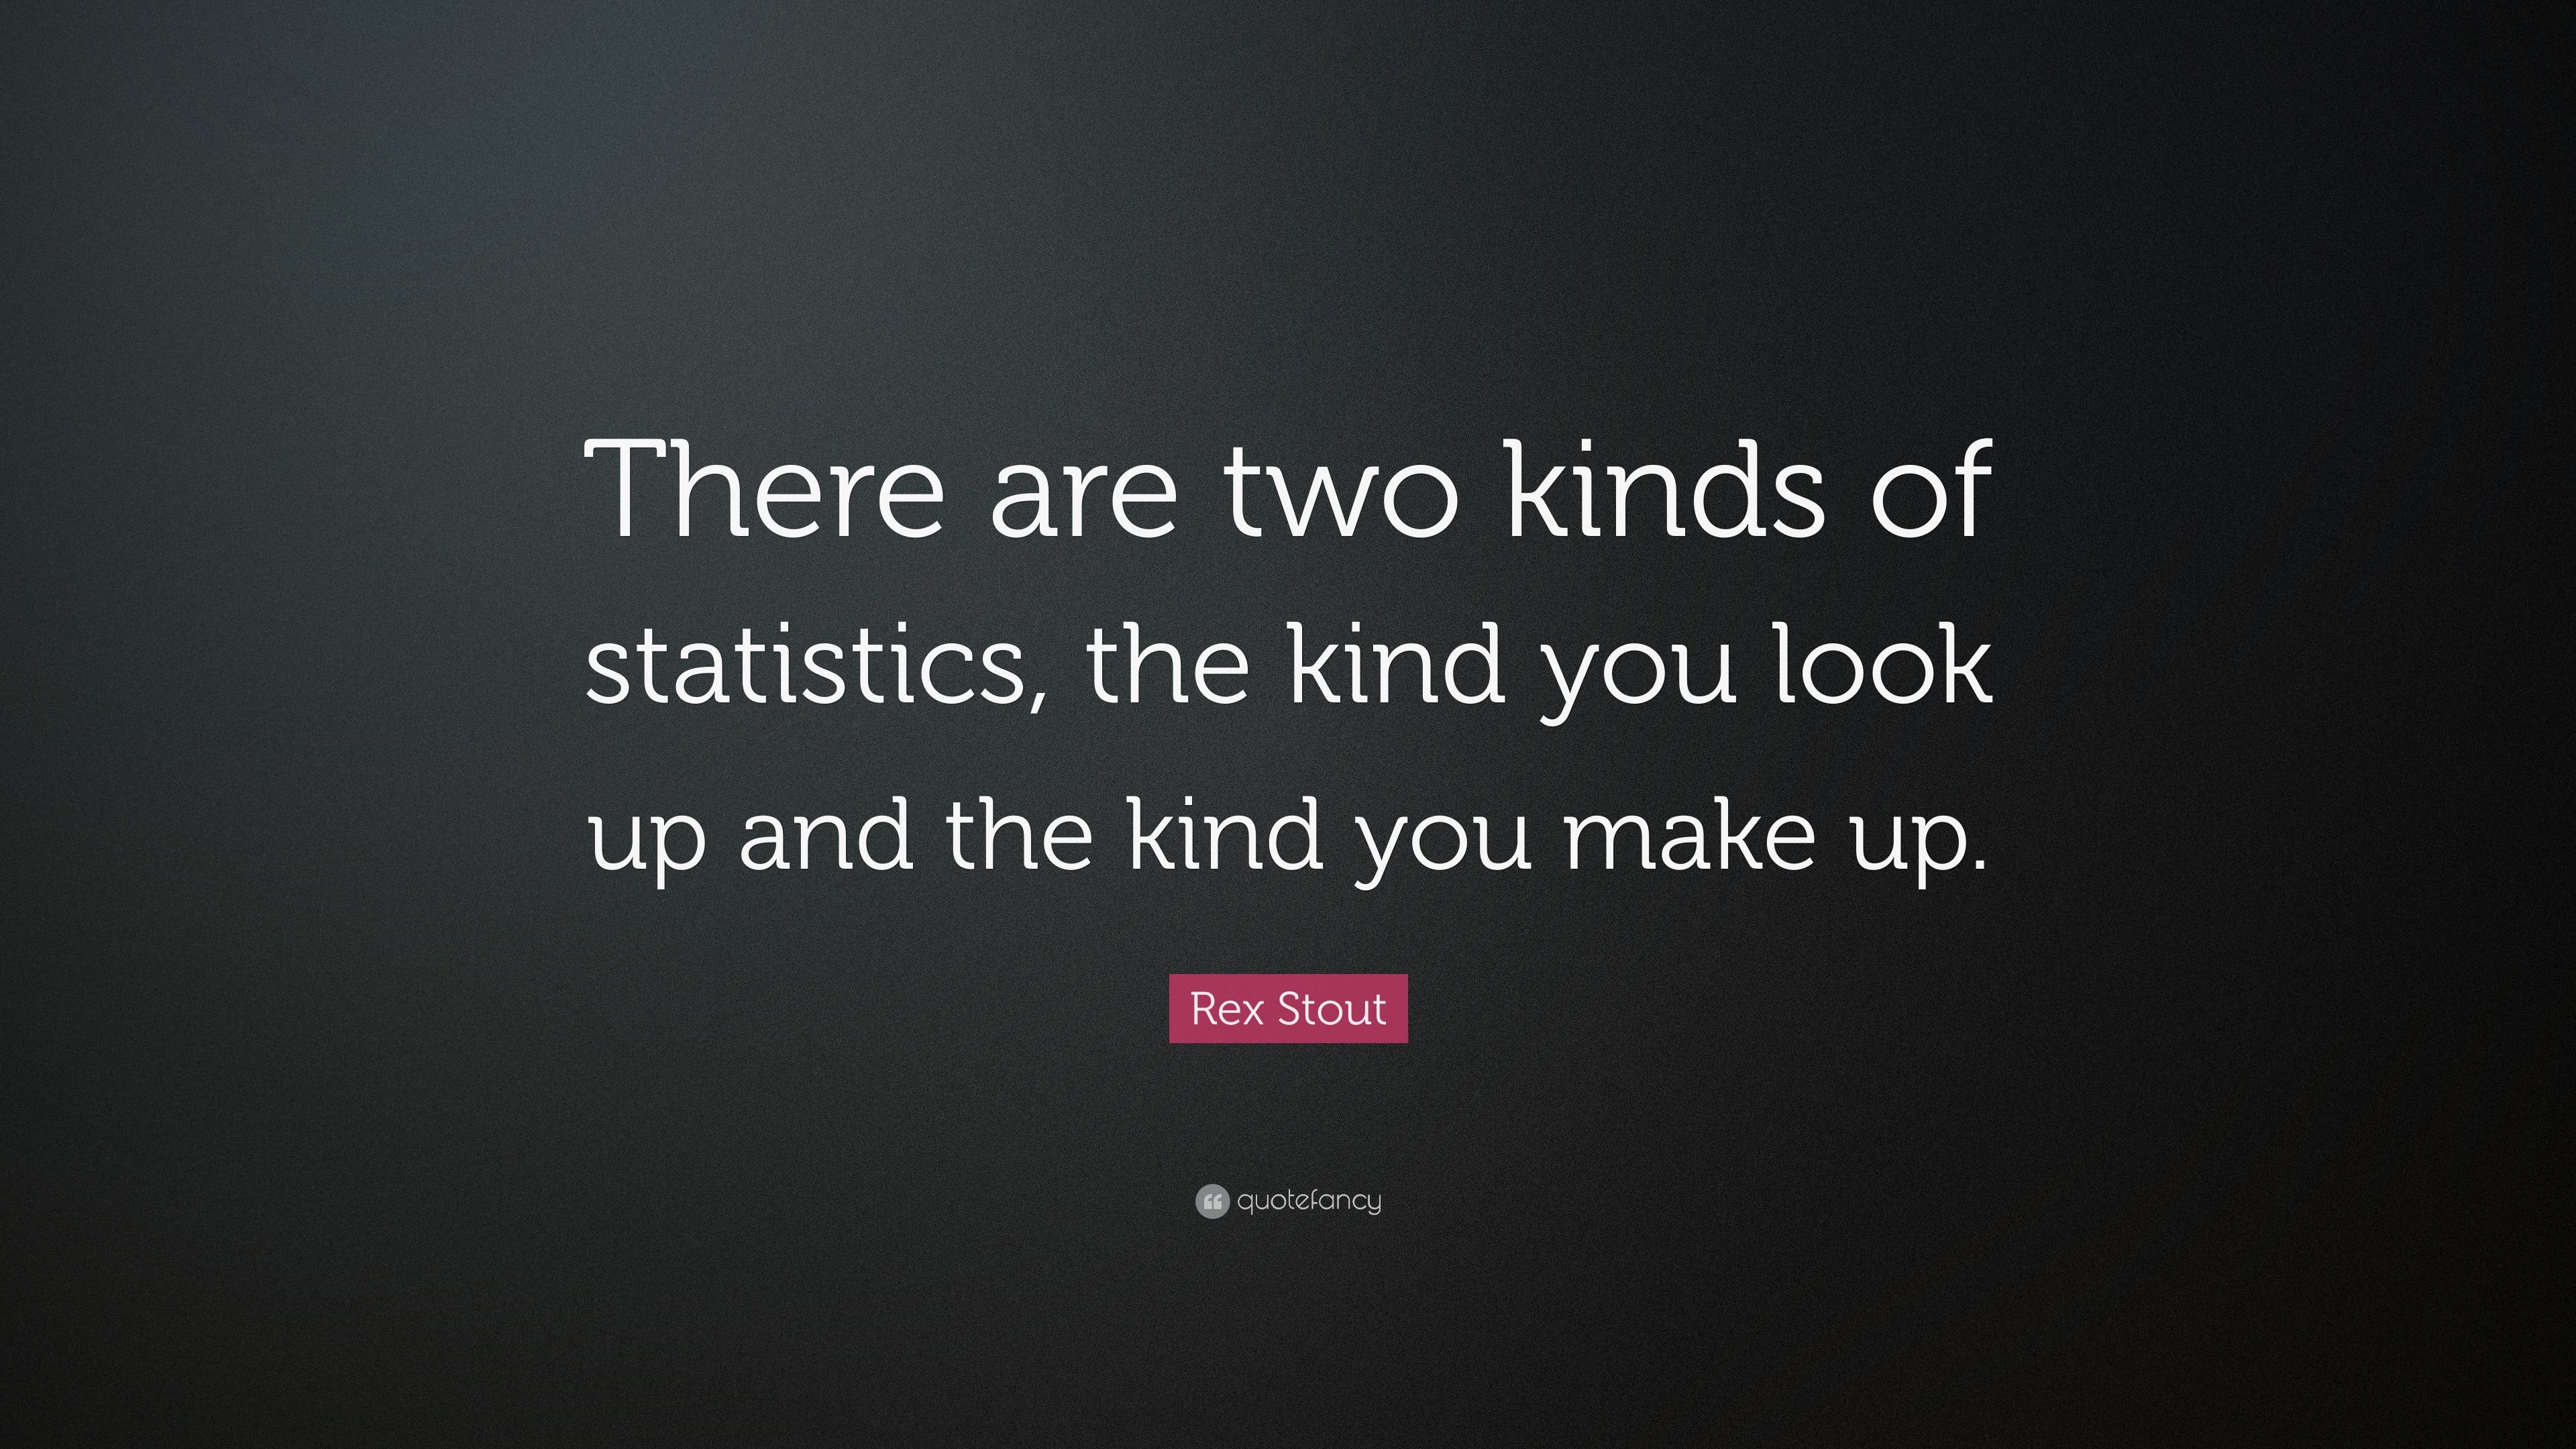 Rex Stout Quote: “There are two kinds of statistics, the kind you